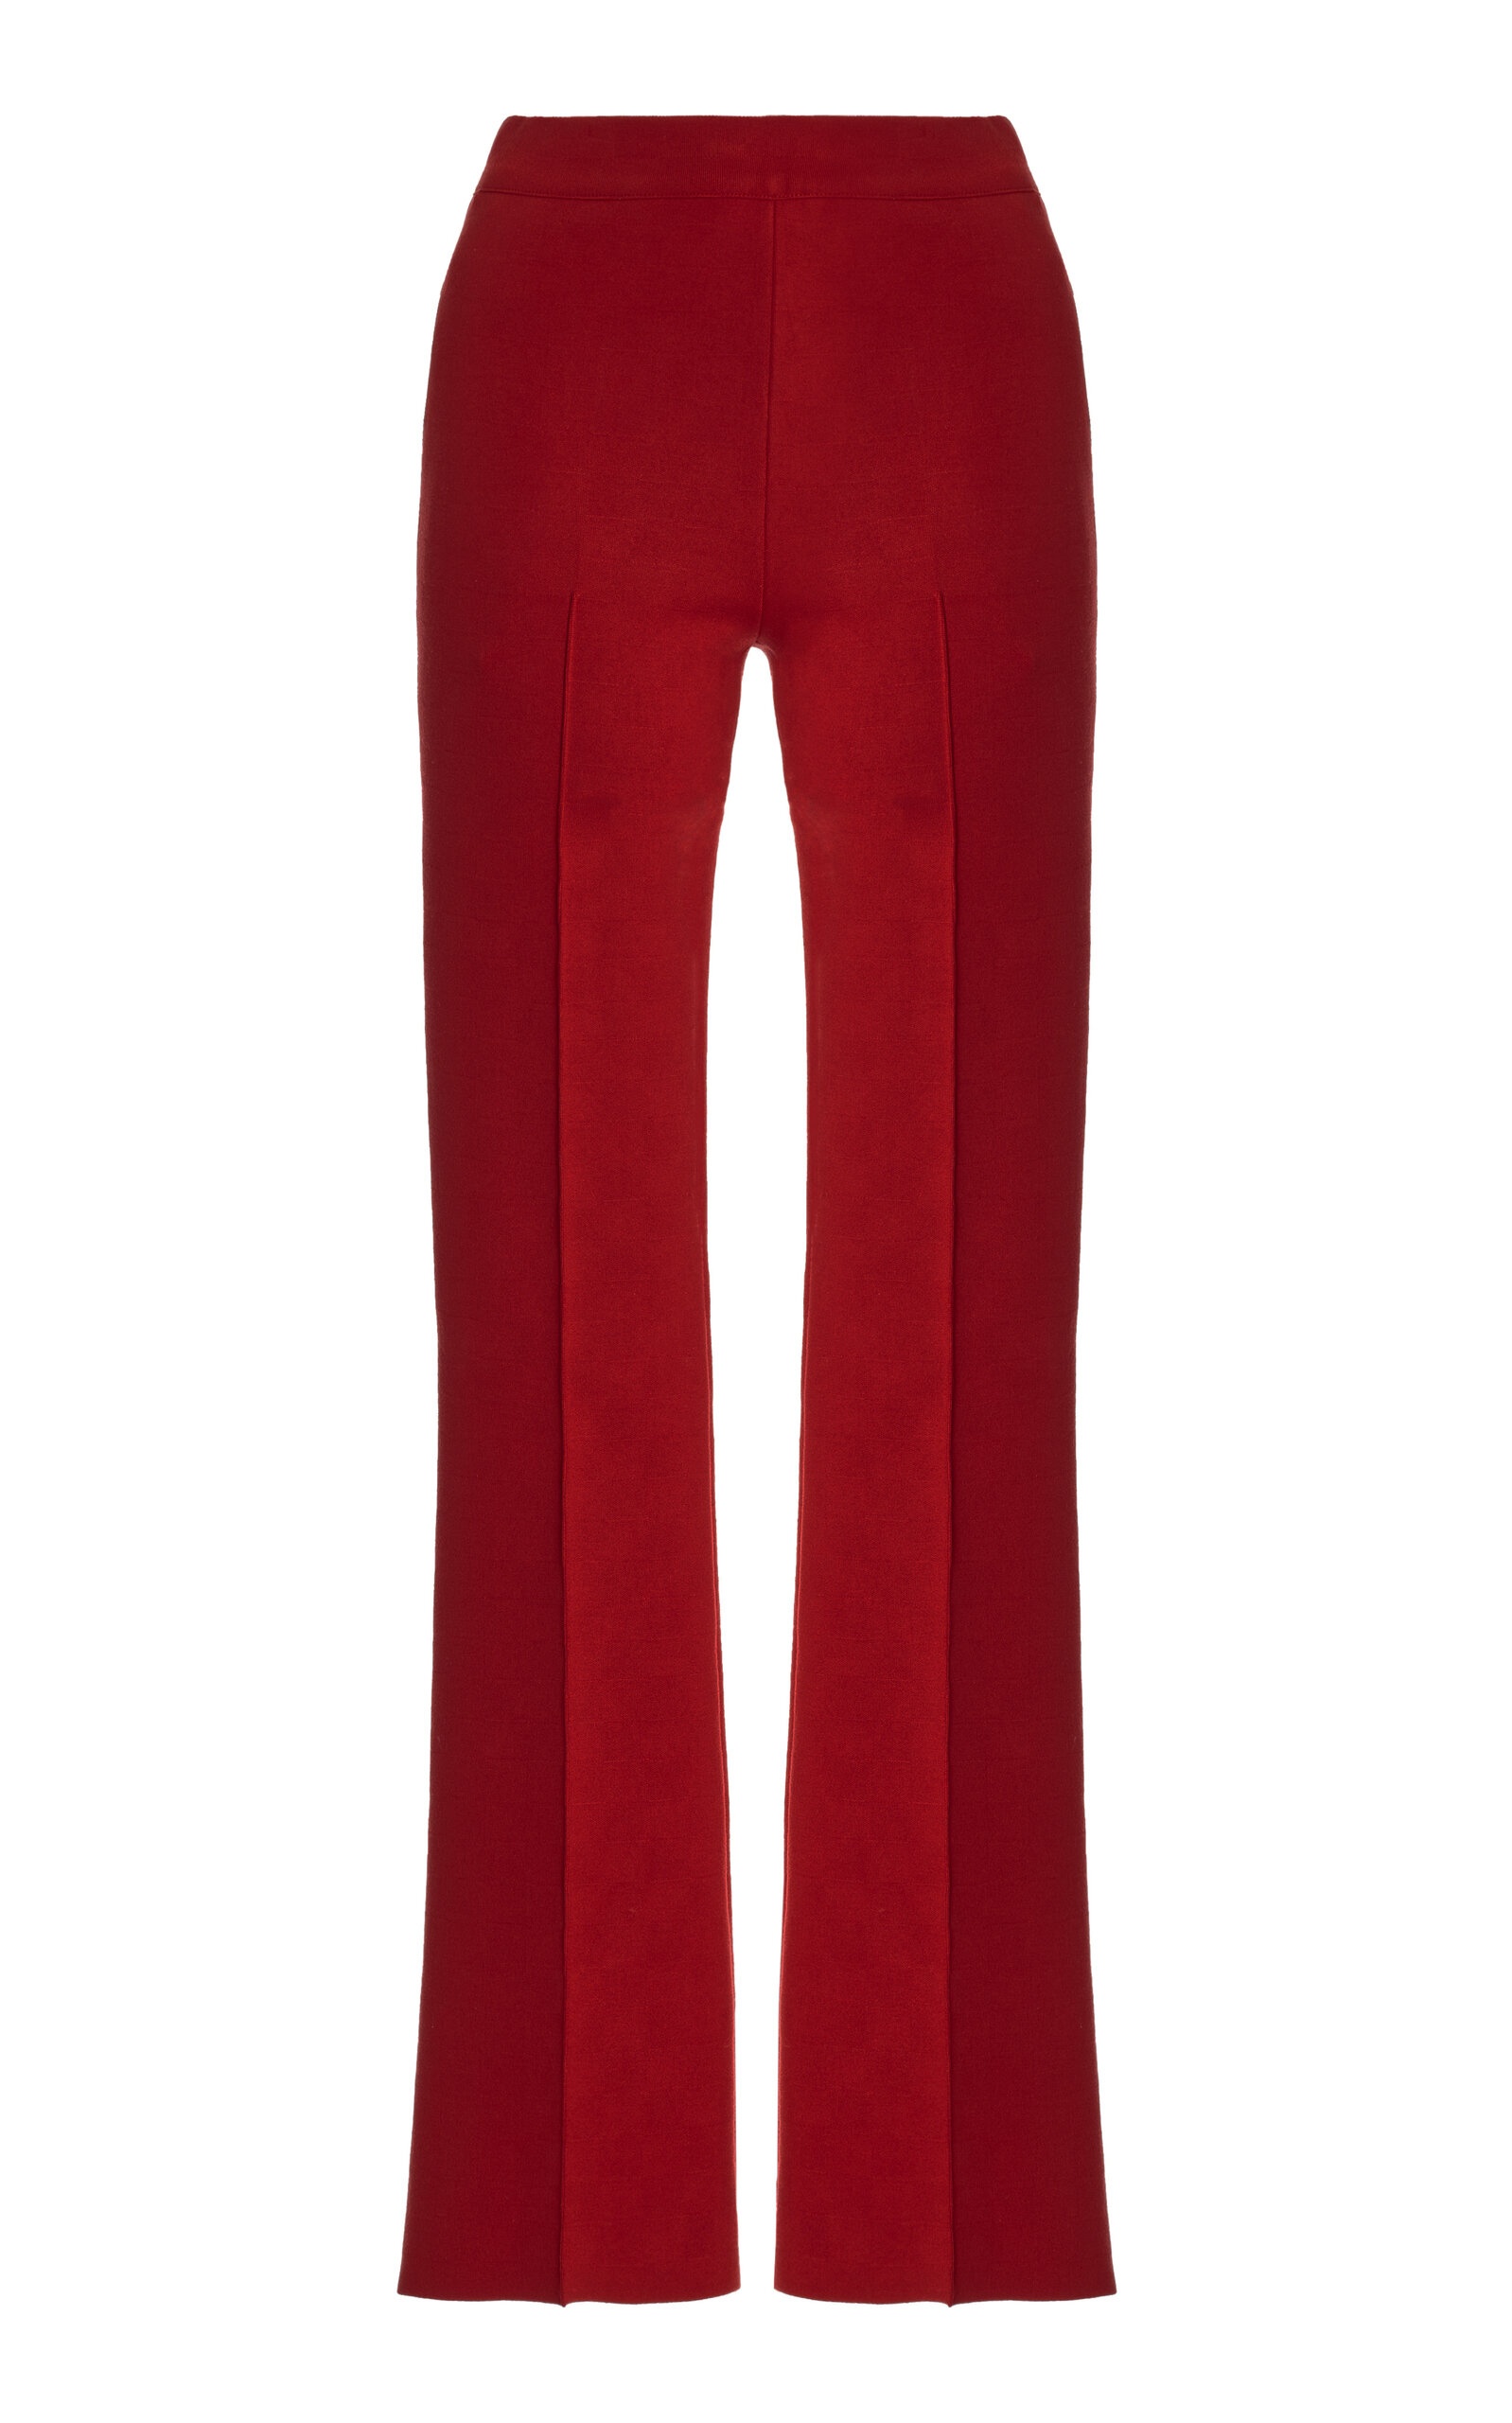 NSFW Jules Stretch Knit Pants red - 1